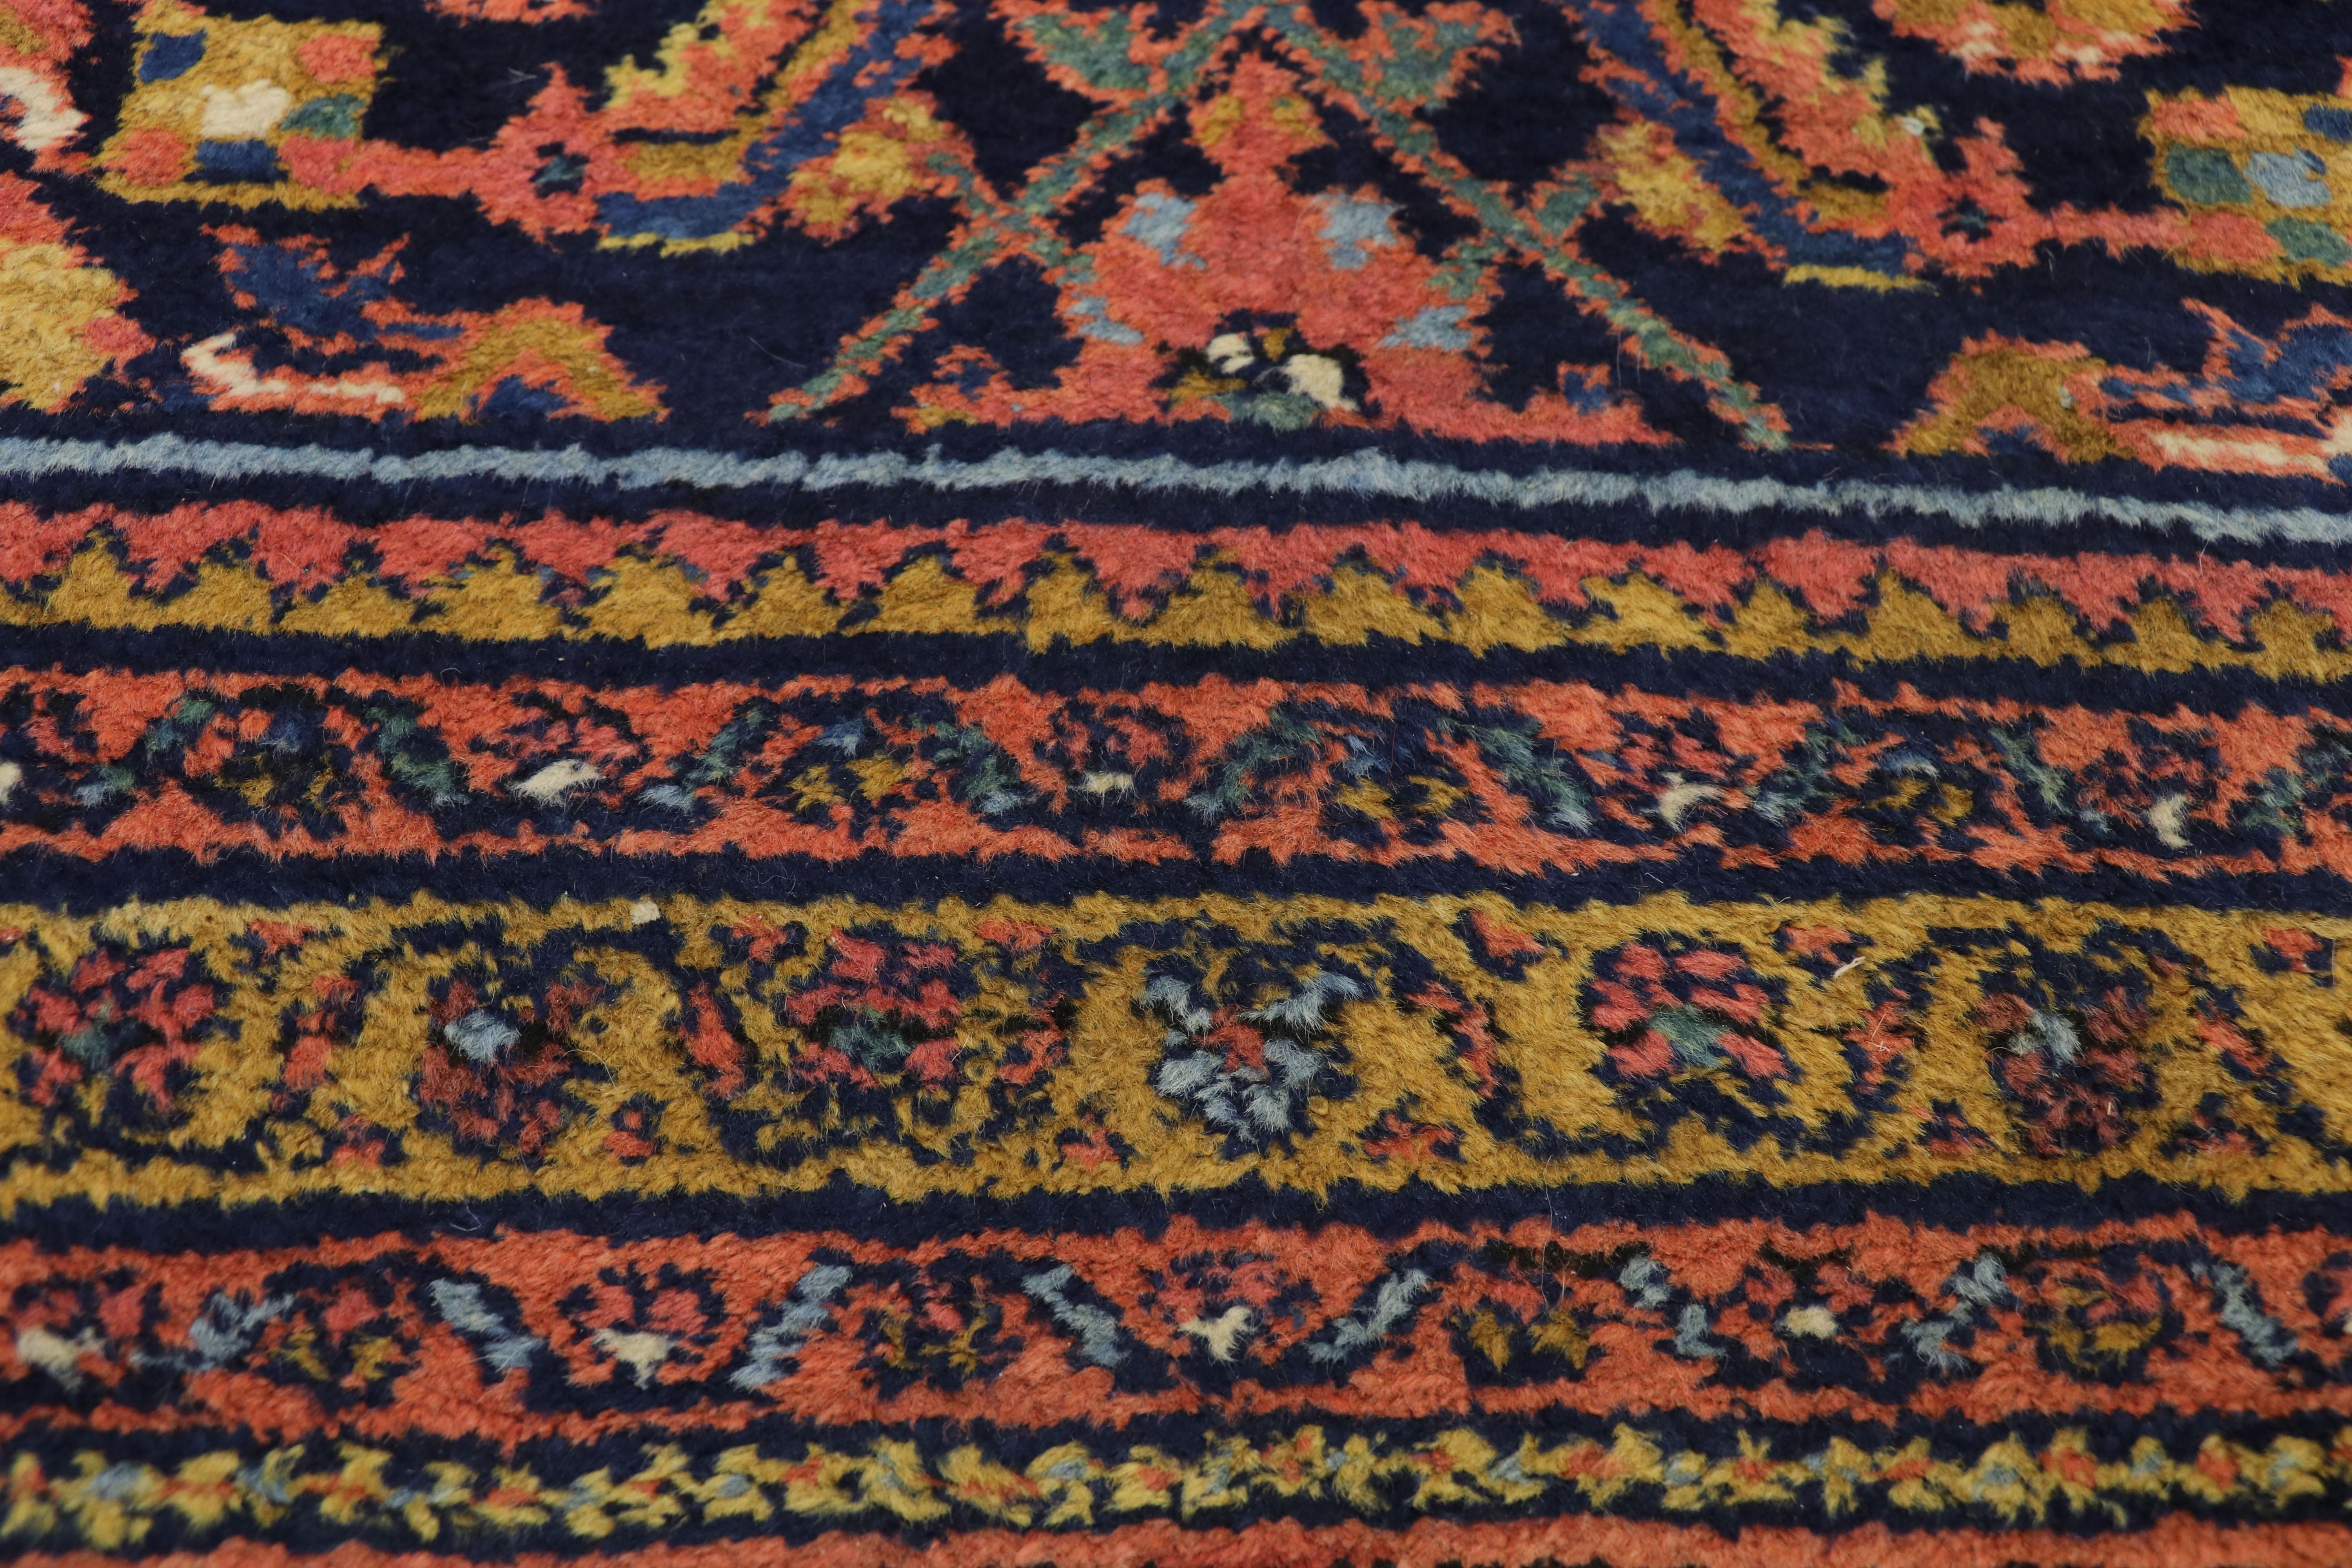 Antique Persian Malayer Runner with Modern Victorian Style In Good Condition For Sale In Dallas, TX